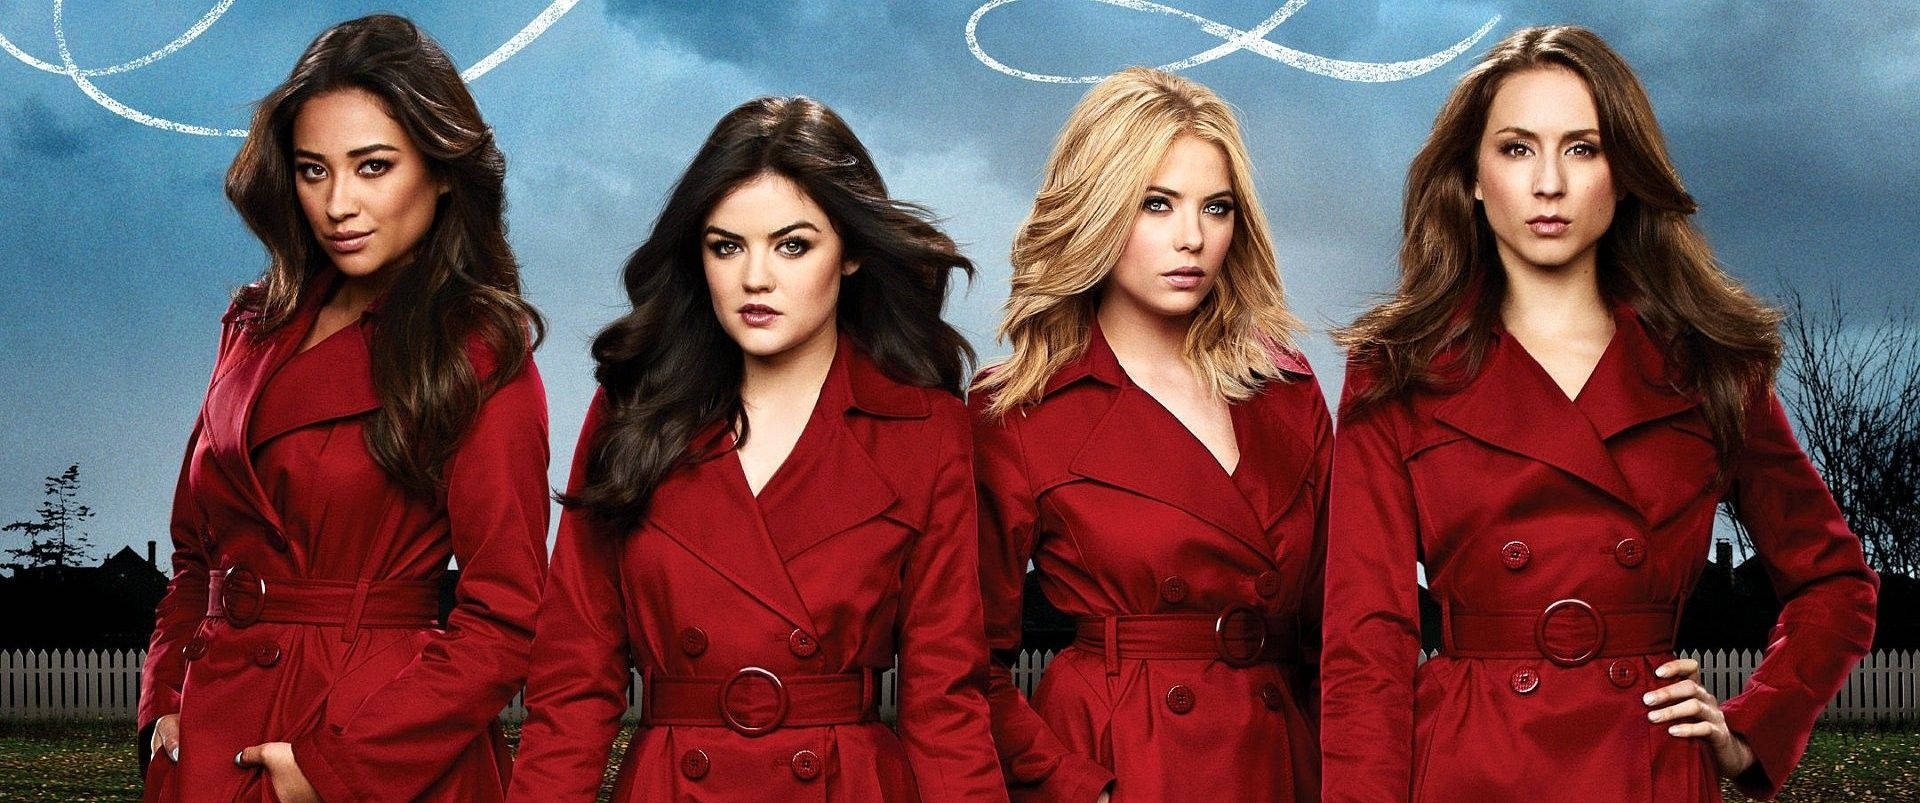 Pretty Little Liars In Red Trench Coats Wallpaper